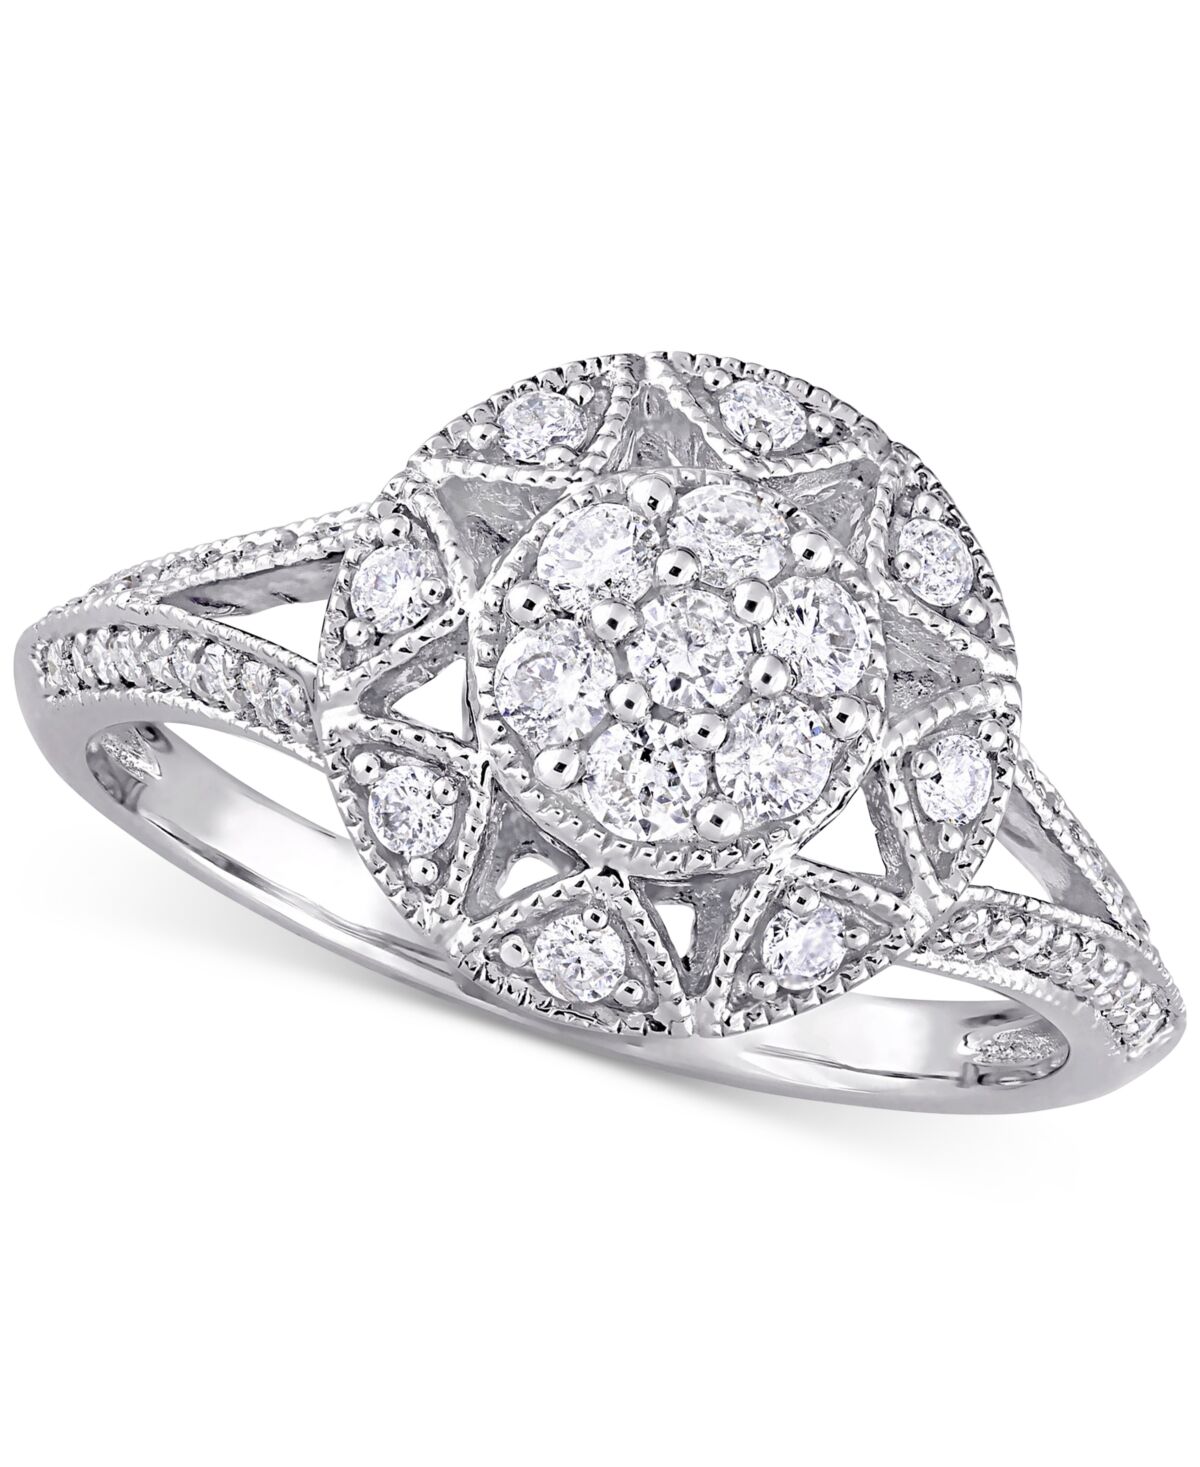 Macy's Diamond Vintage-Inspired Cluster Engagement Ring (1/2 ct. t.w.) in 14k White Gold - White Gold